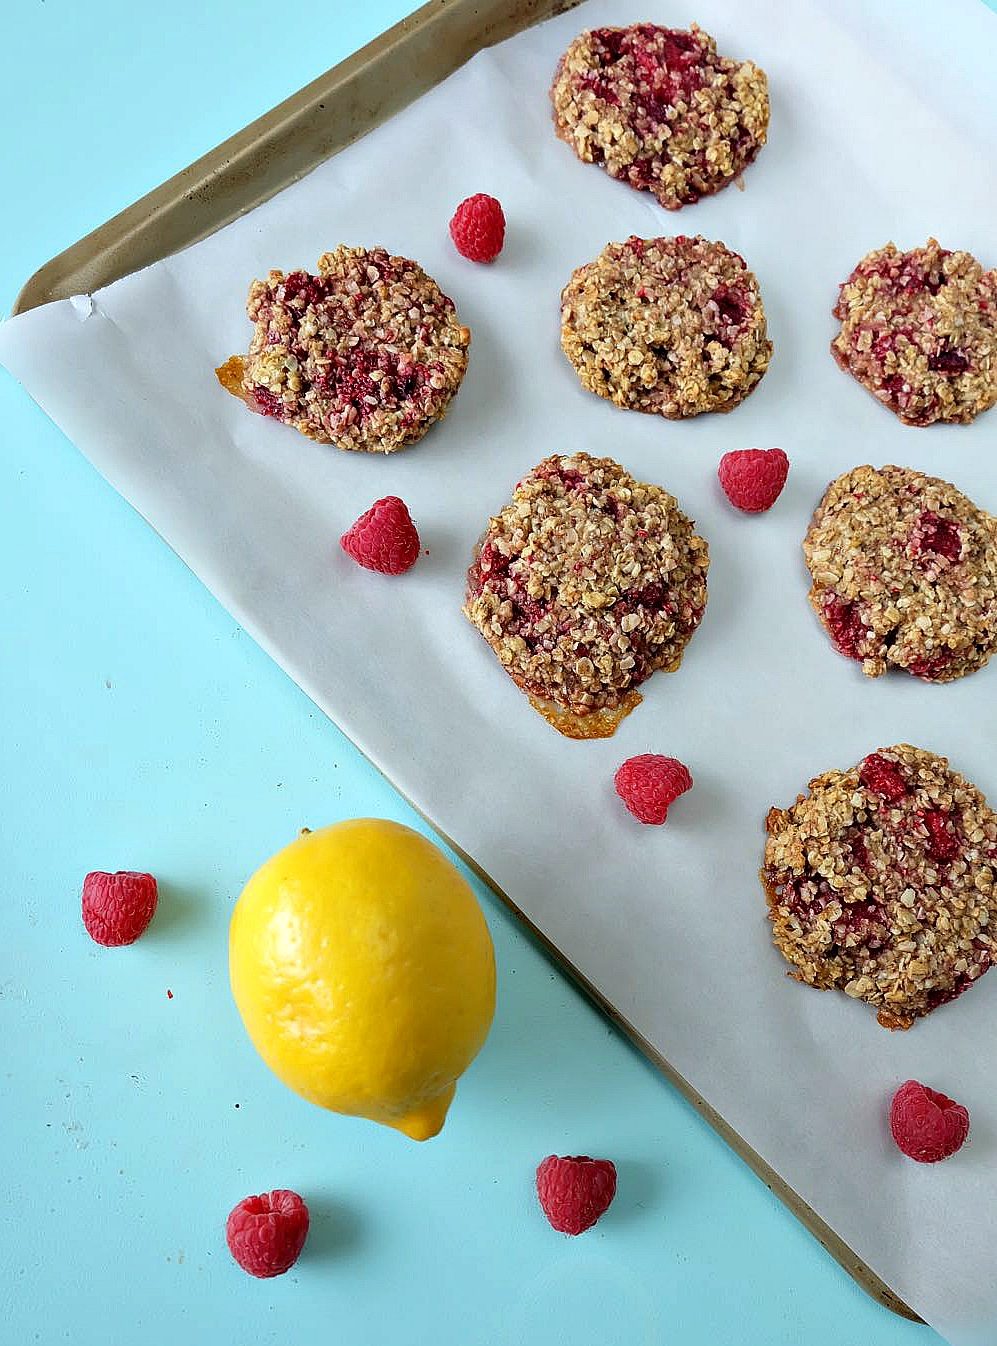 Looking for a delicious, easy and healthy breakfast idea? This healthy lemon raspberry breakfast cookie recipe is a delicious and guilt free way to start the day! Perfect for breakfast on the go, its gluten free, low in sugar, dairy free and packed with the bright and beautiful flavors of lemon and raspberries! Freeze extras for breakfast meal planning!